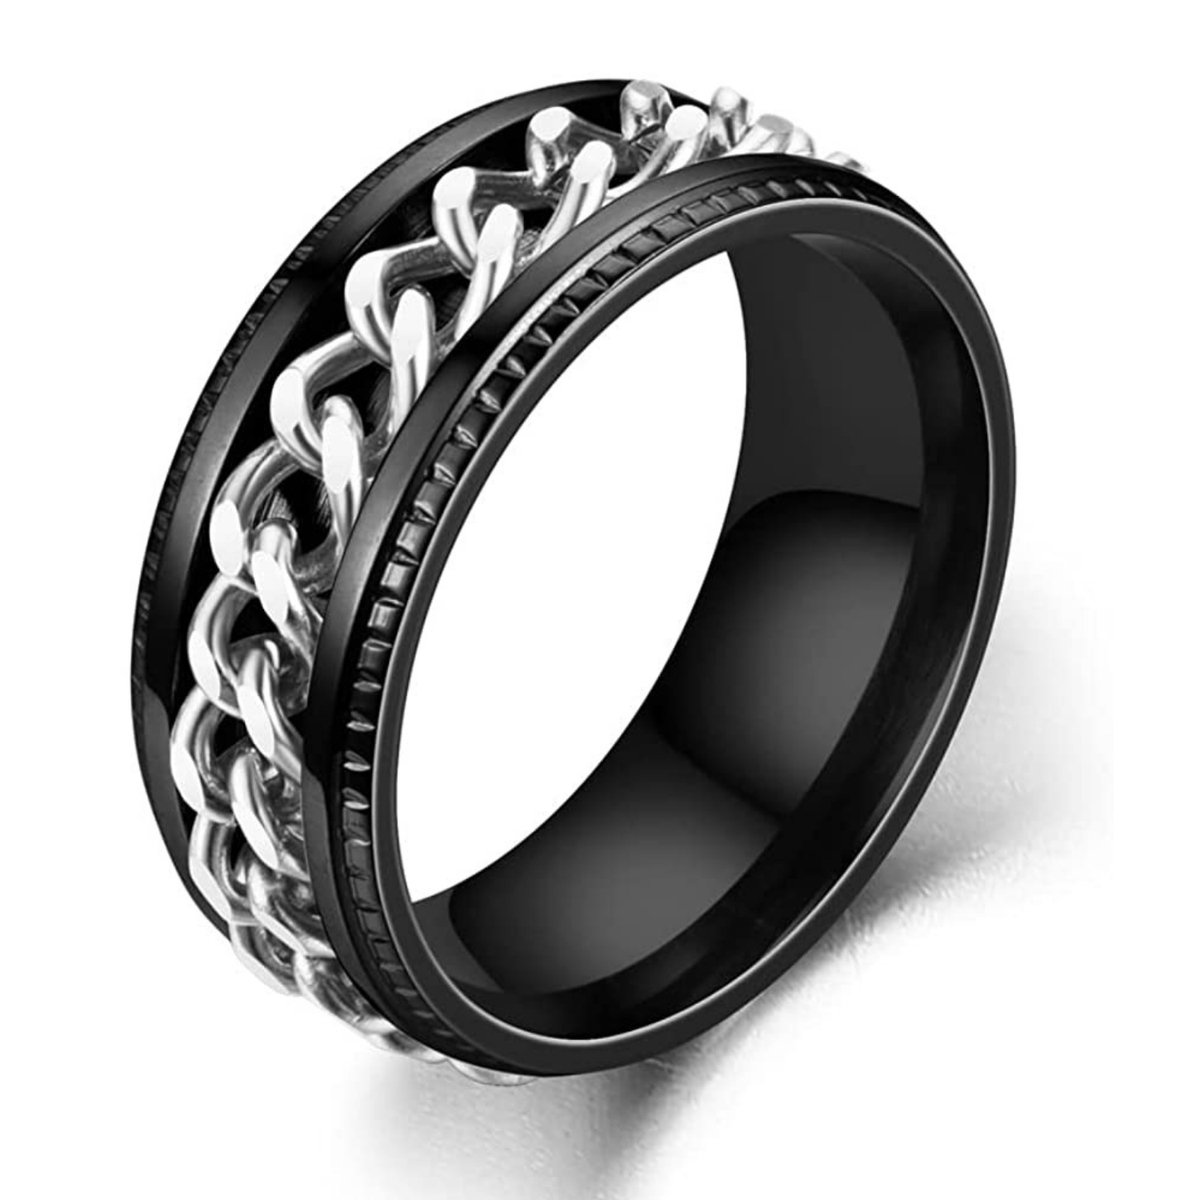 Anxiety Ring - (Ketting) - Stress Ring - Fidget Ring - Anxiety Ring For Finger - Draaibare Ring - Spinning Ring - Zwart-Zilver- (23.25mm / maat 73)